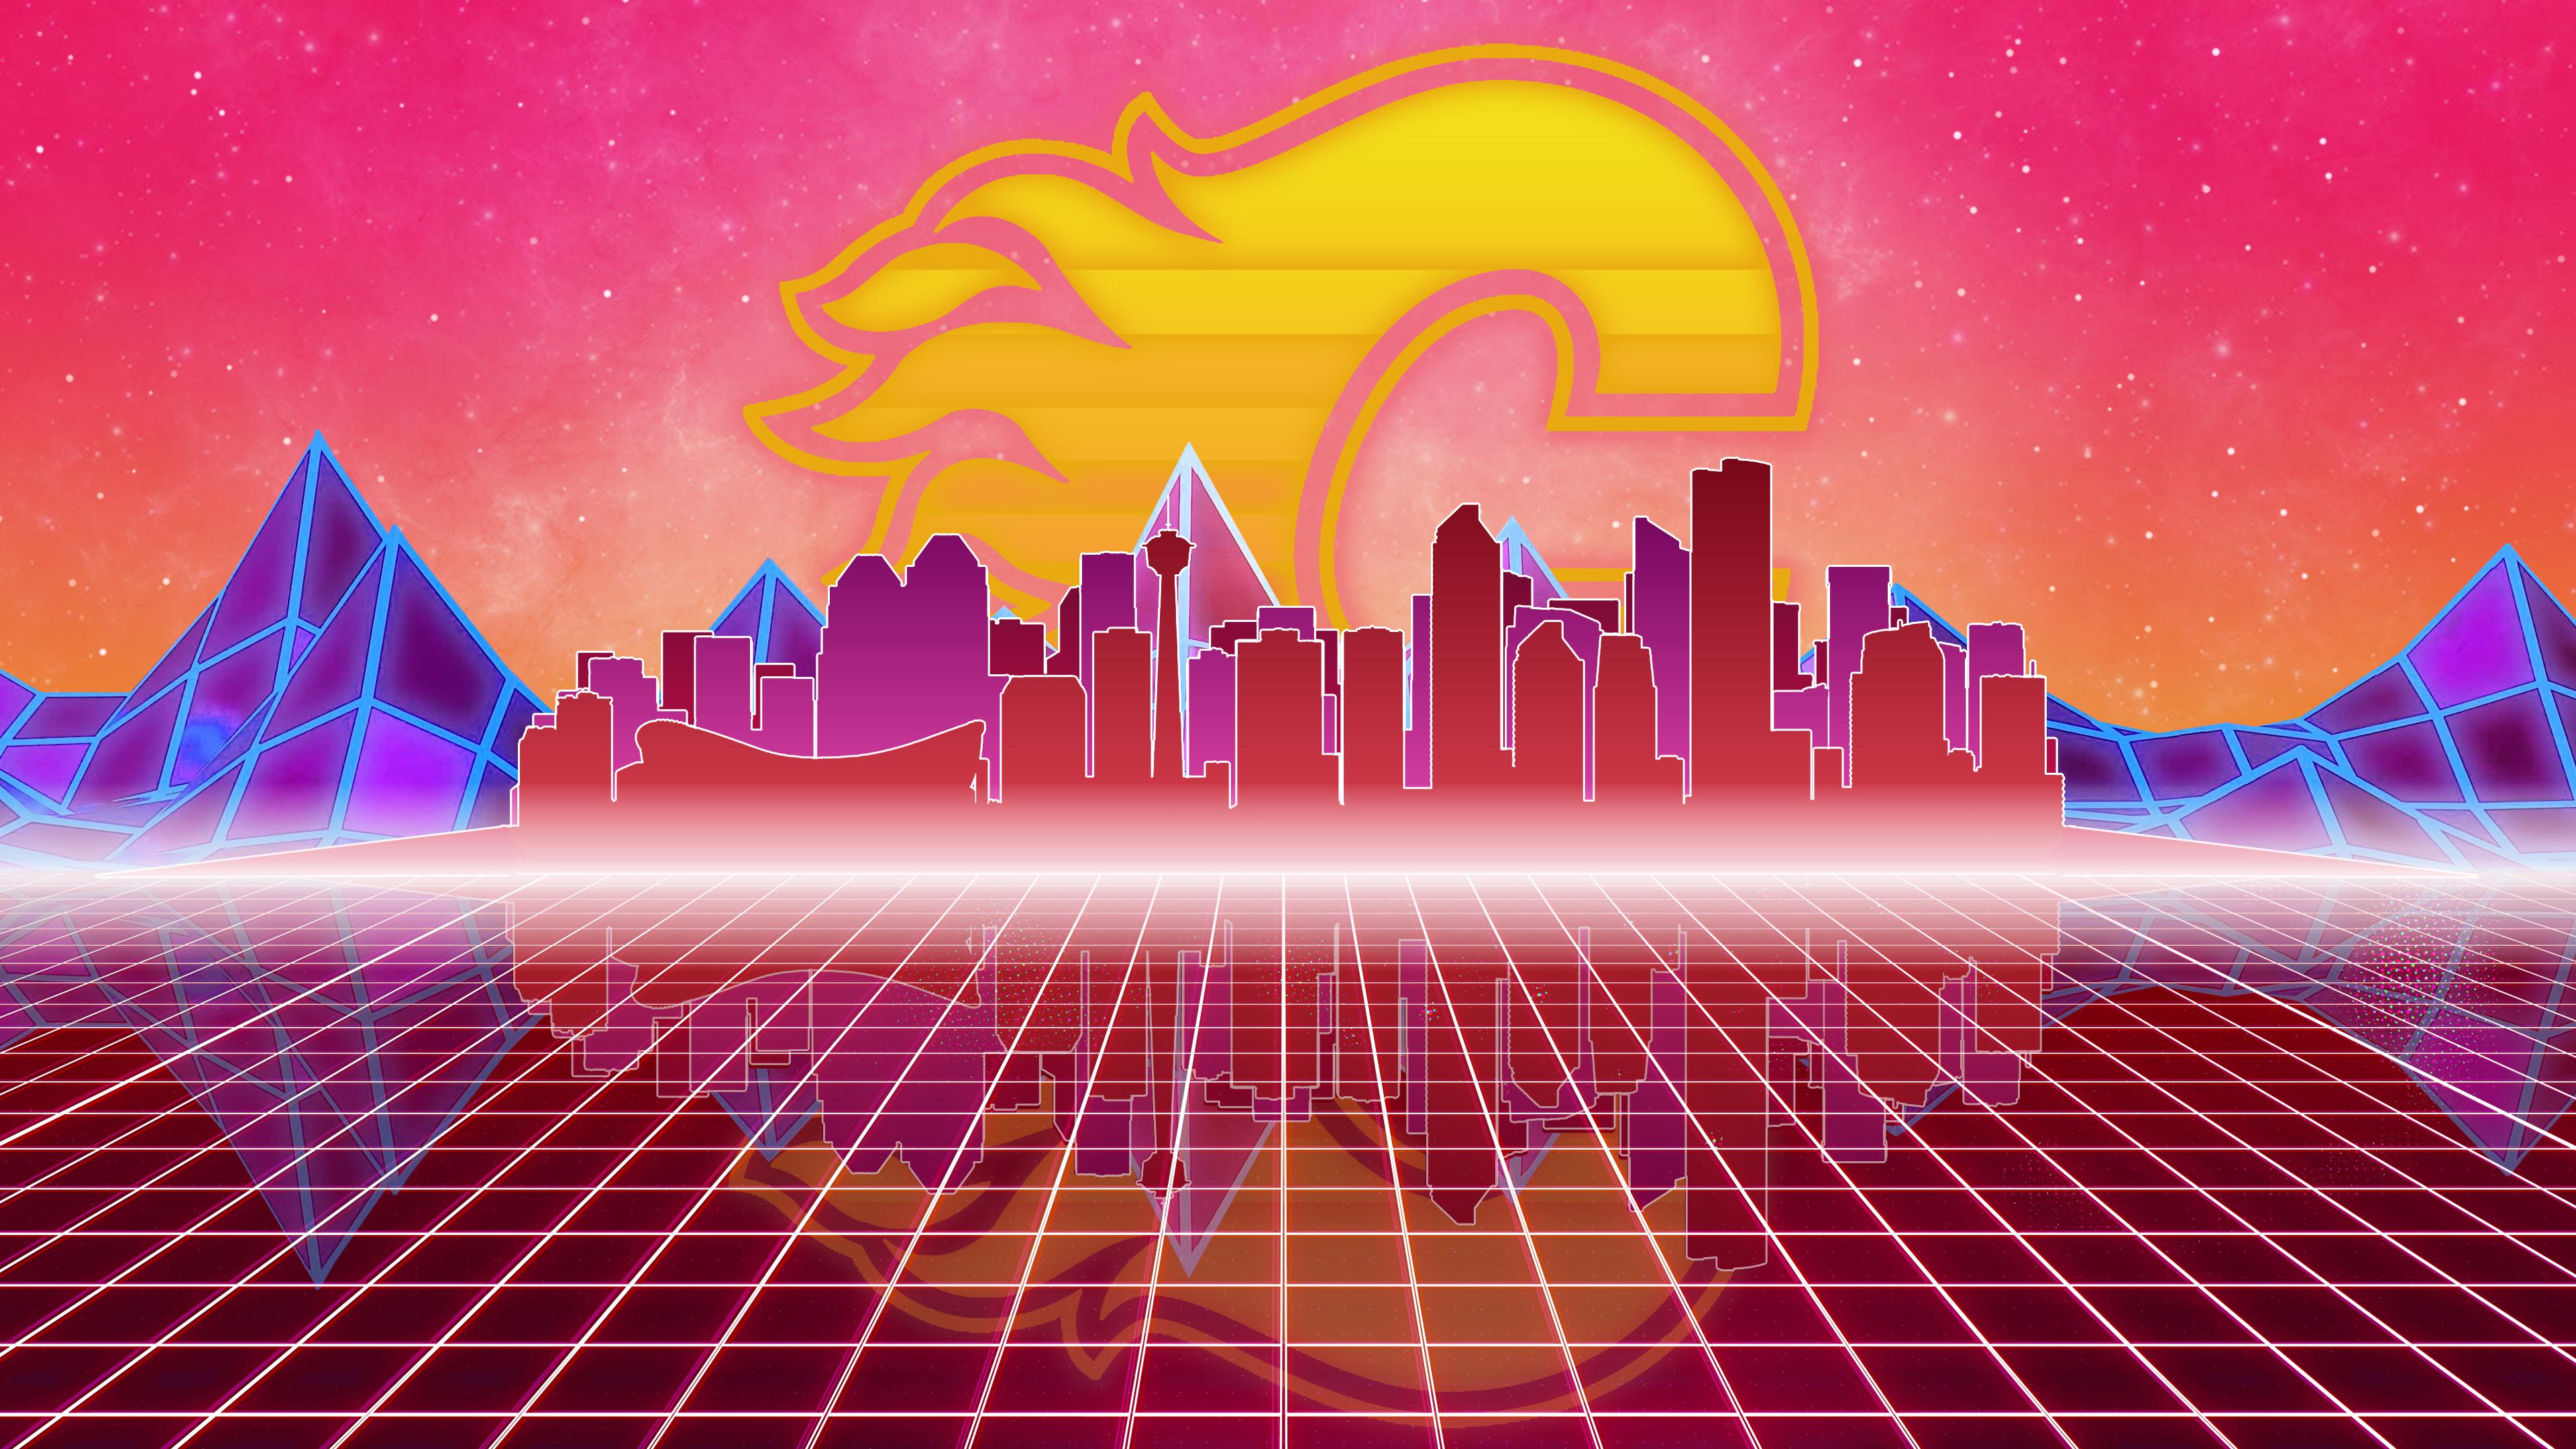 Made another Flames wallpaper, this one inspired by 80's synthwave aesthetic. Link to both desktop and mobile version in comments